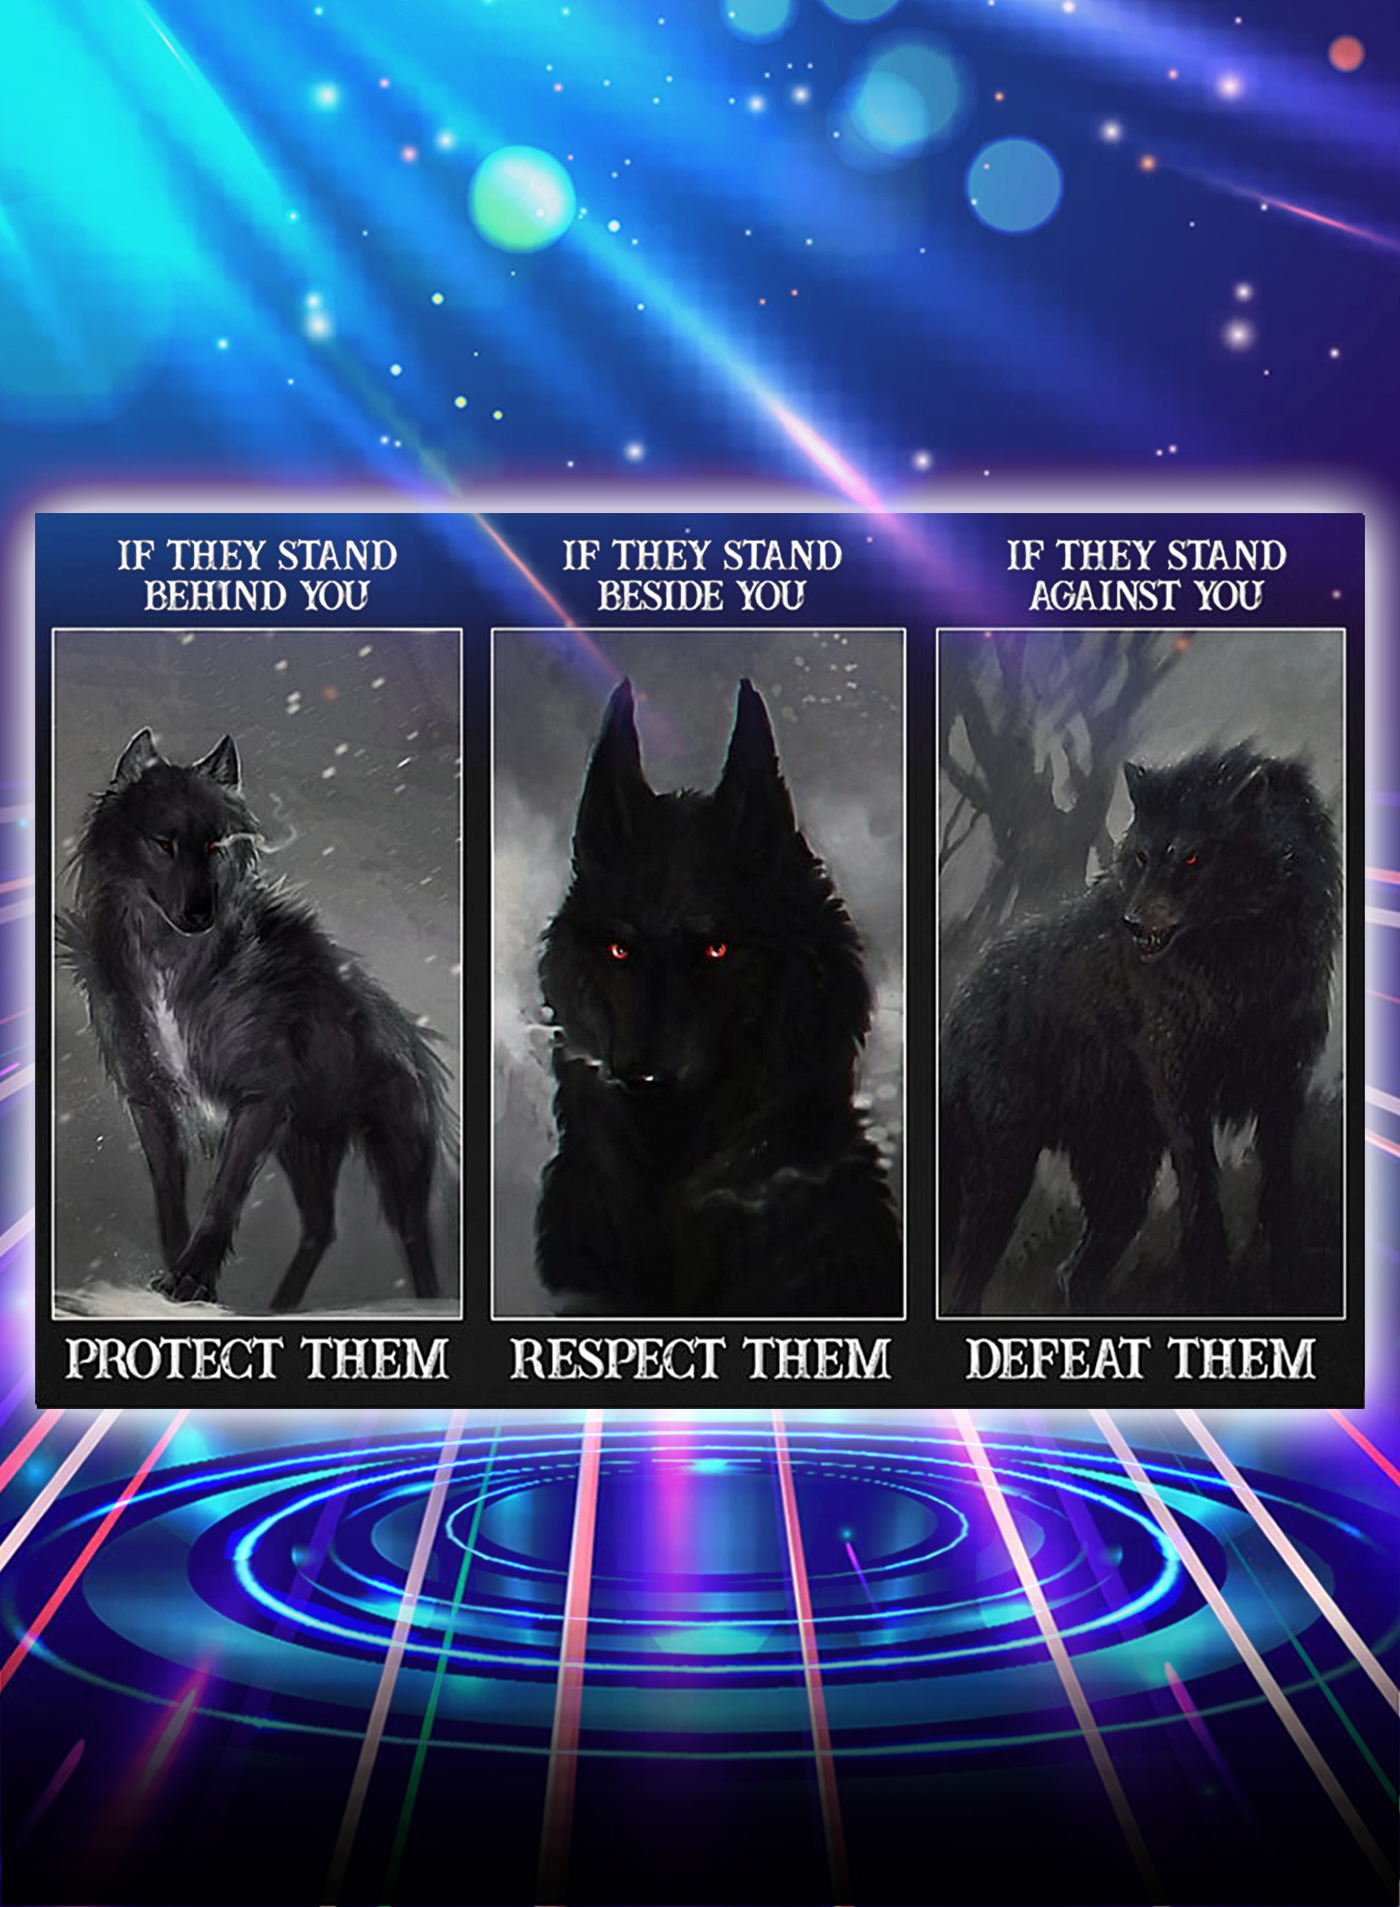 Wolf if they stand behind you protect them poster - A1